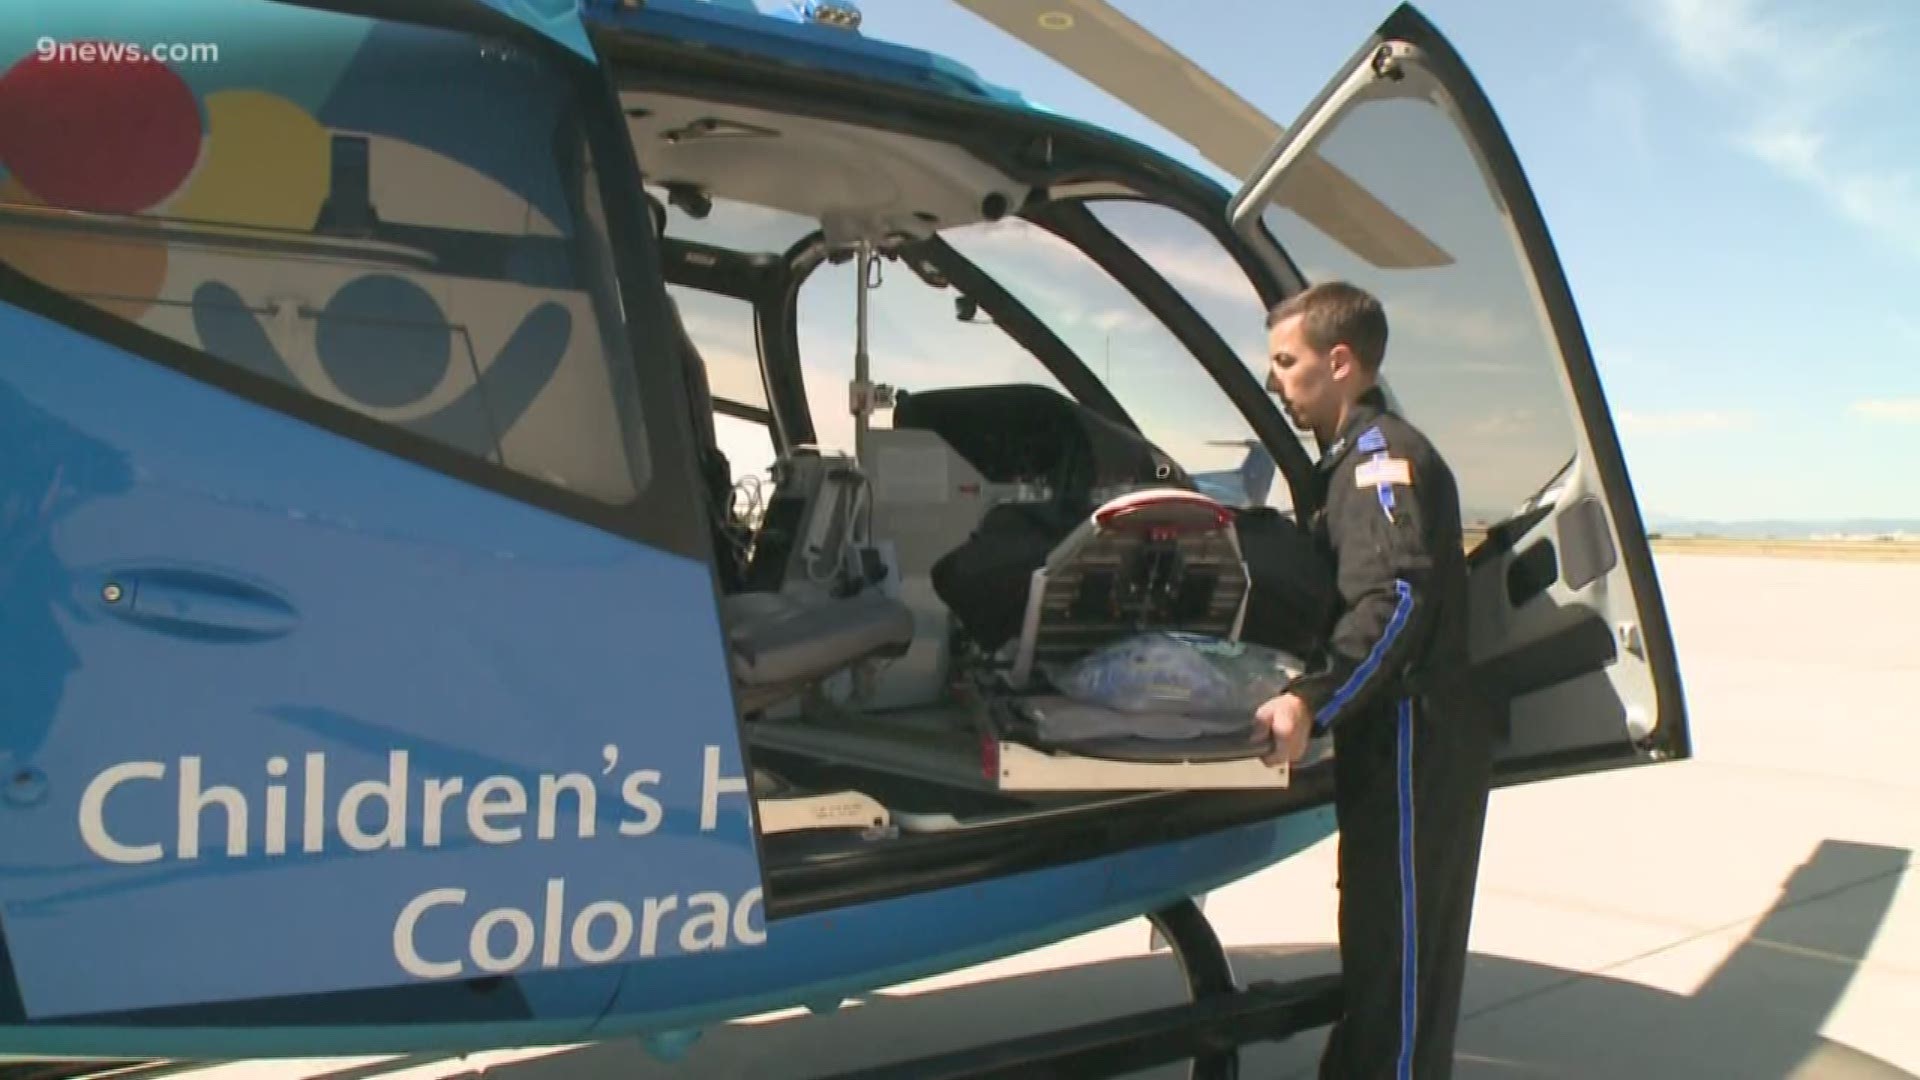 On their 45th anniversary of flight, Children's Hospital Colorado has announced a new partnership.